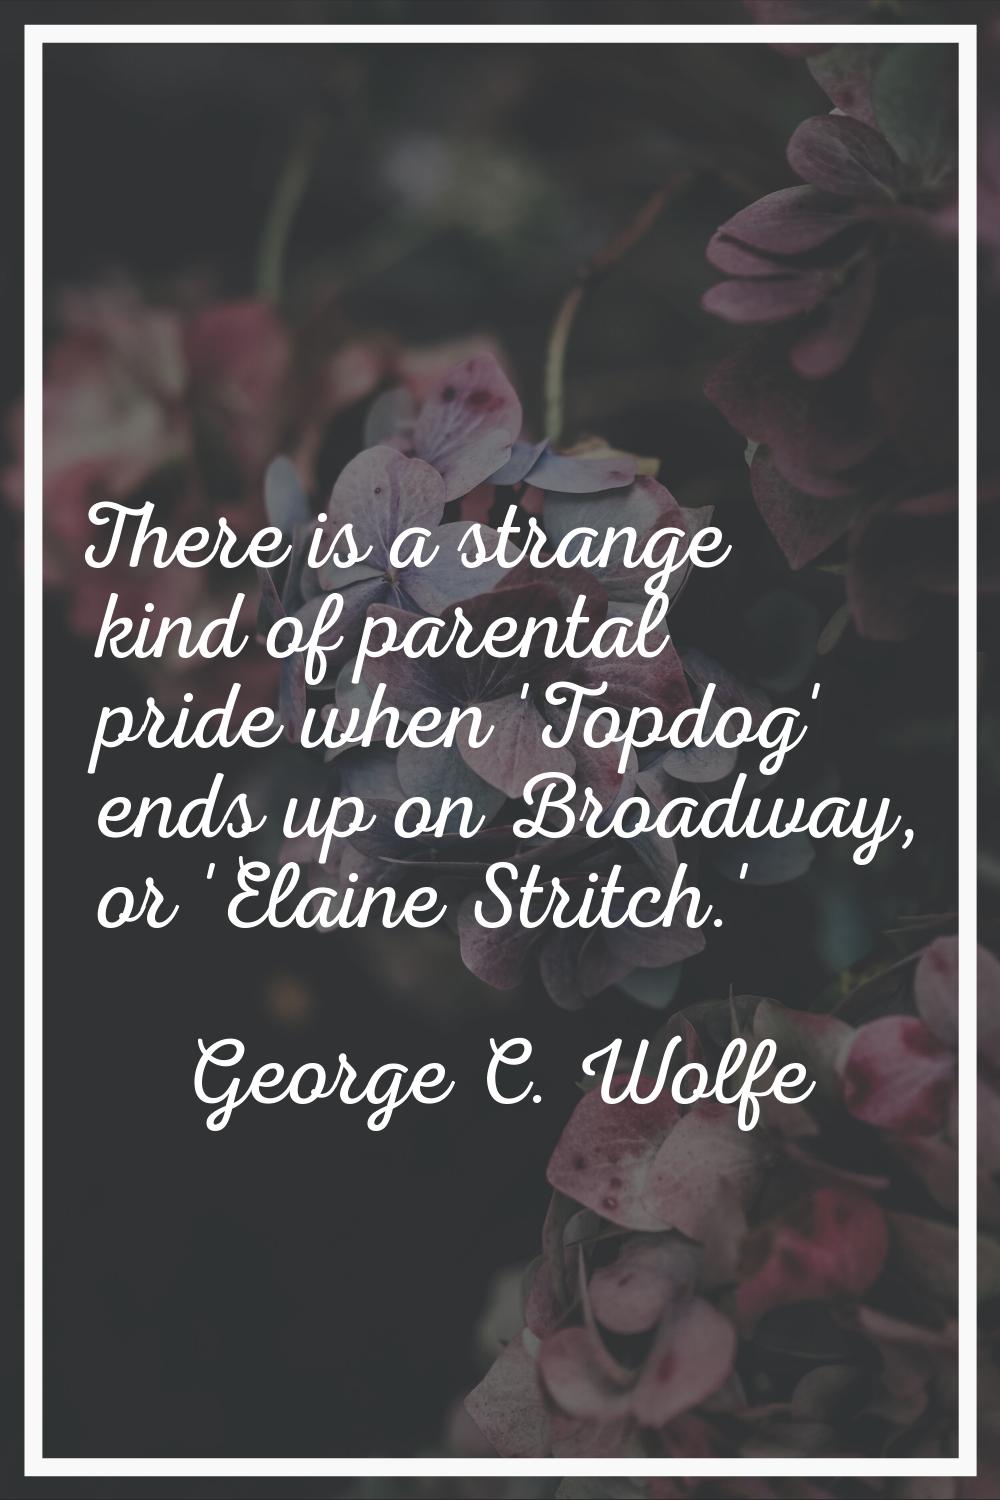 There is a strange kind of parental pride when 'Topdog' ends up on Broadway, or 'Elaine Stritch.'